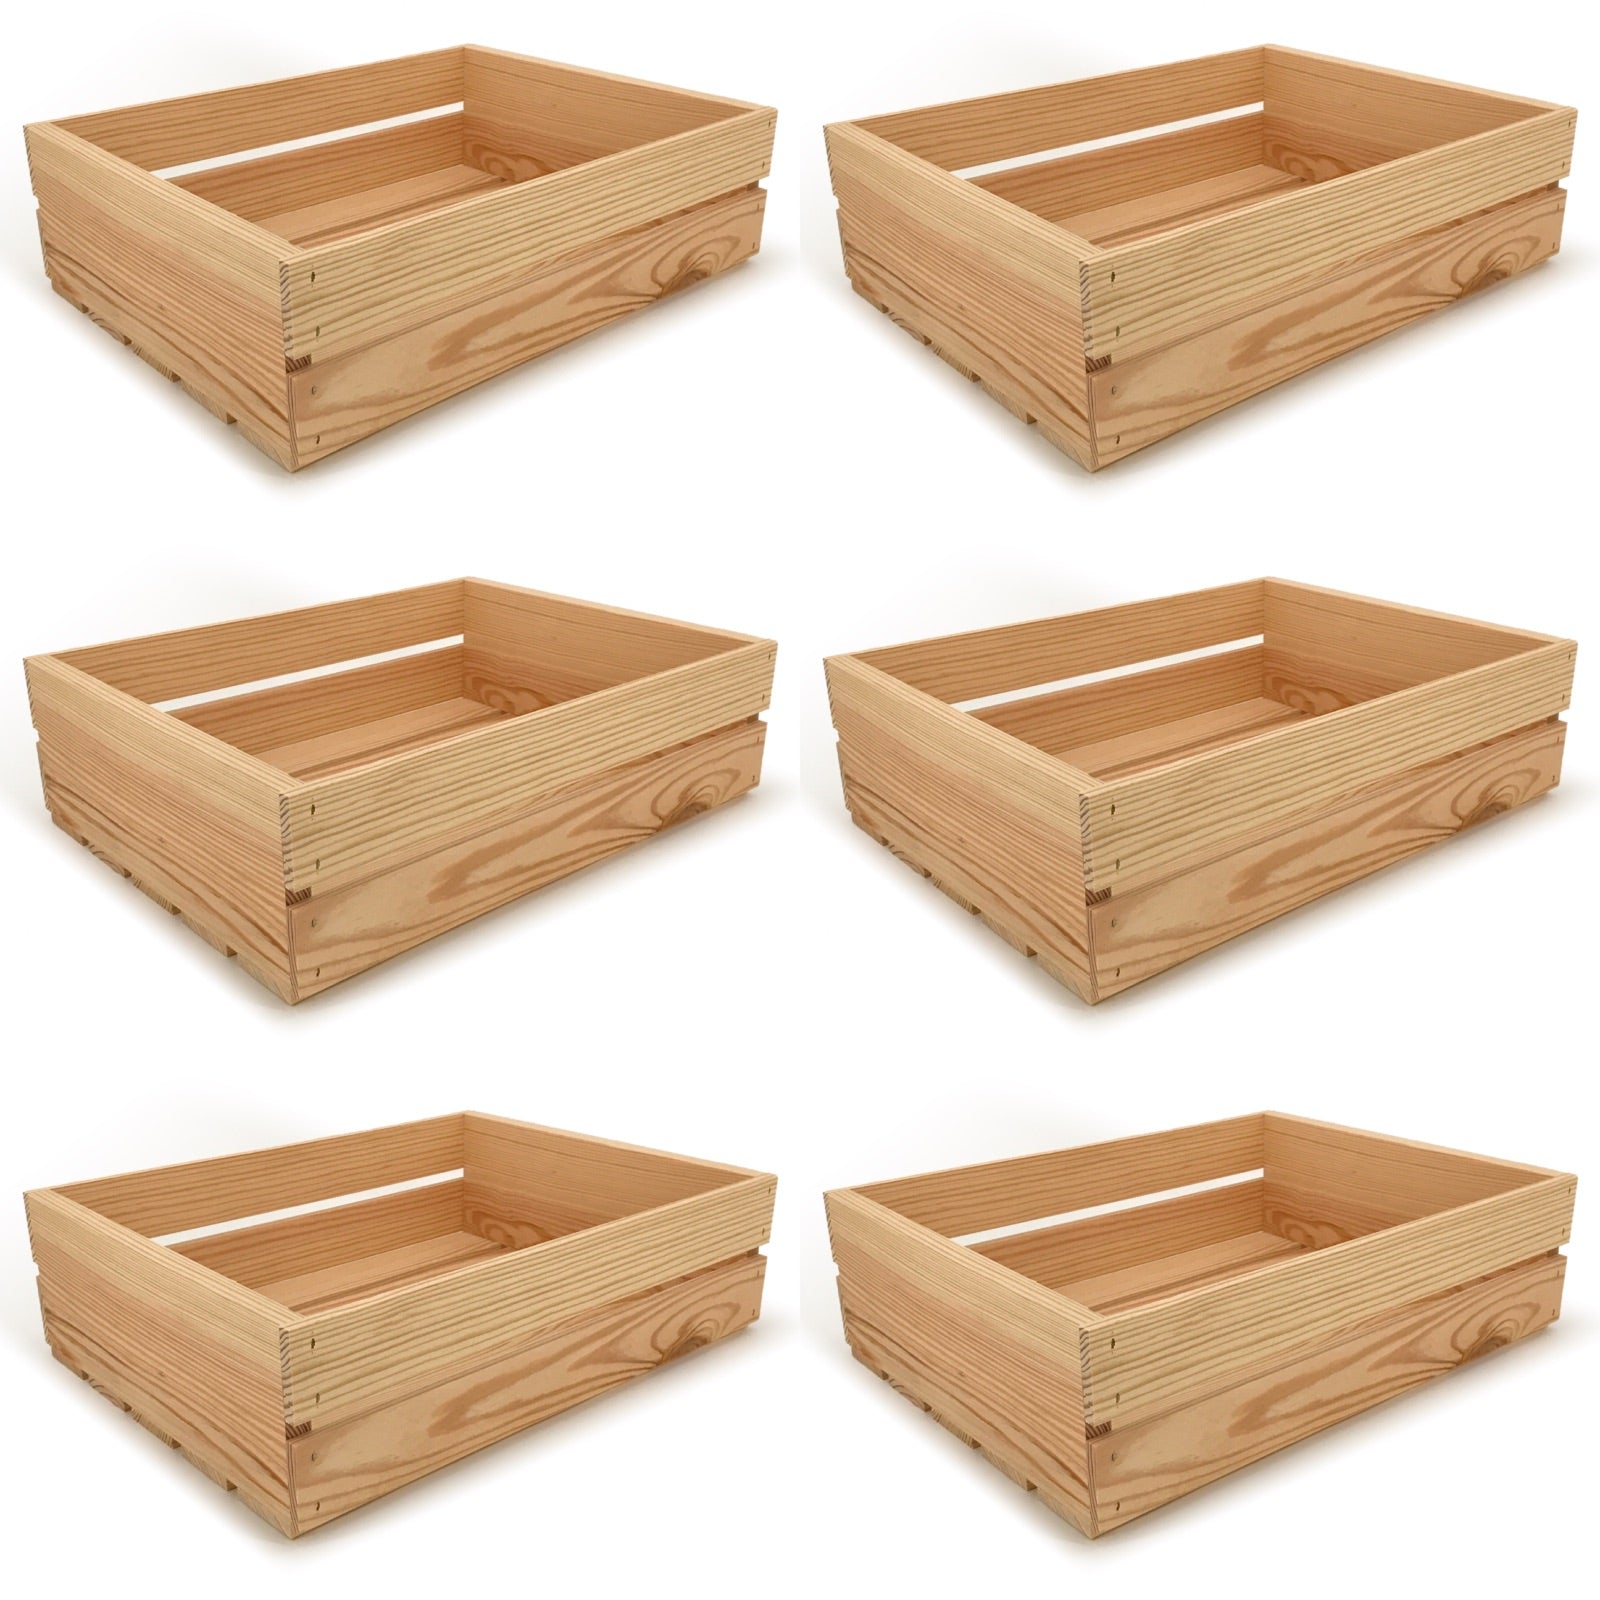 6 Small wooden crates 18x14x5.25